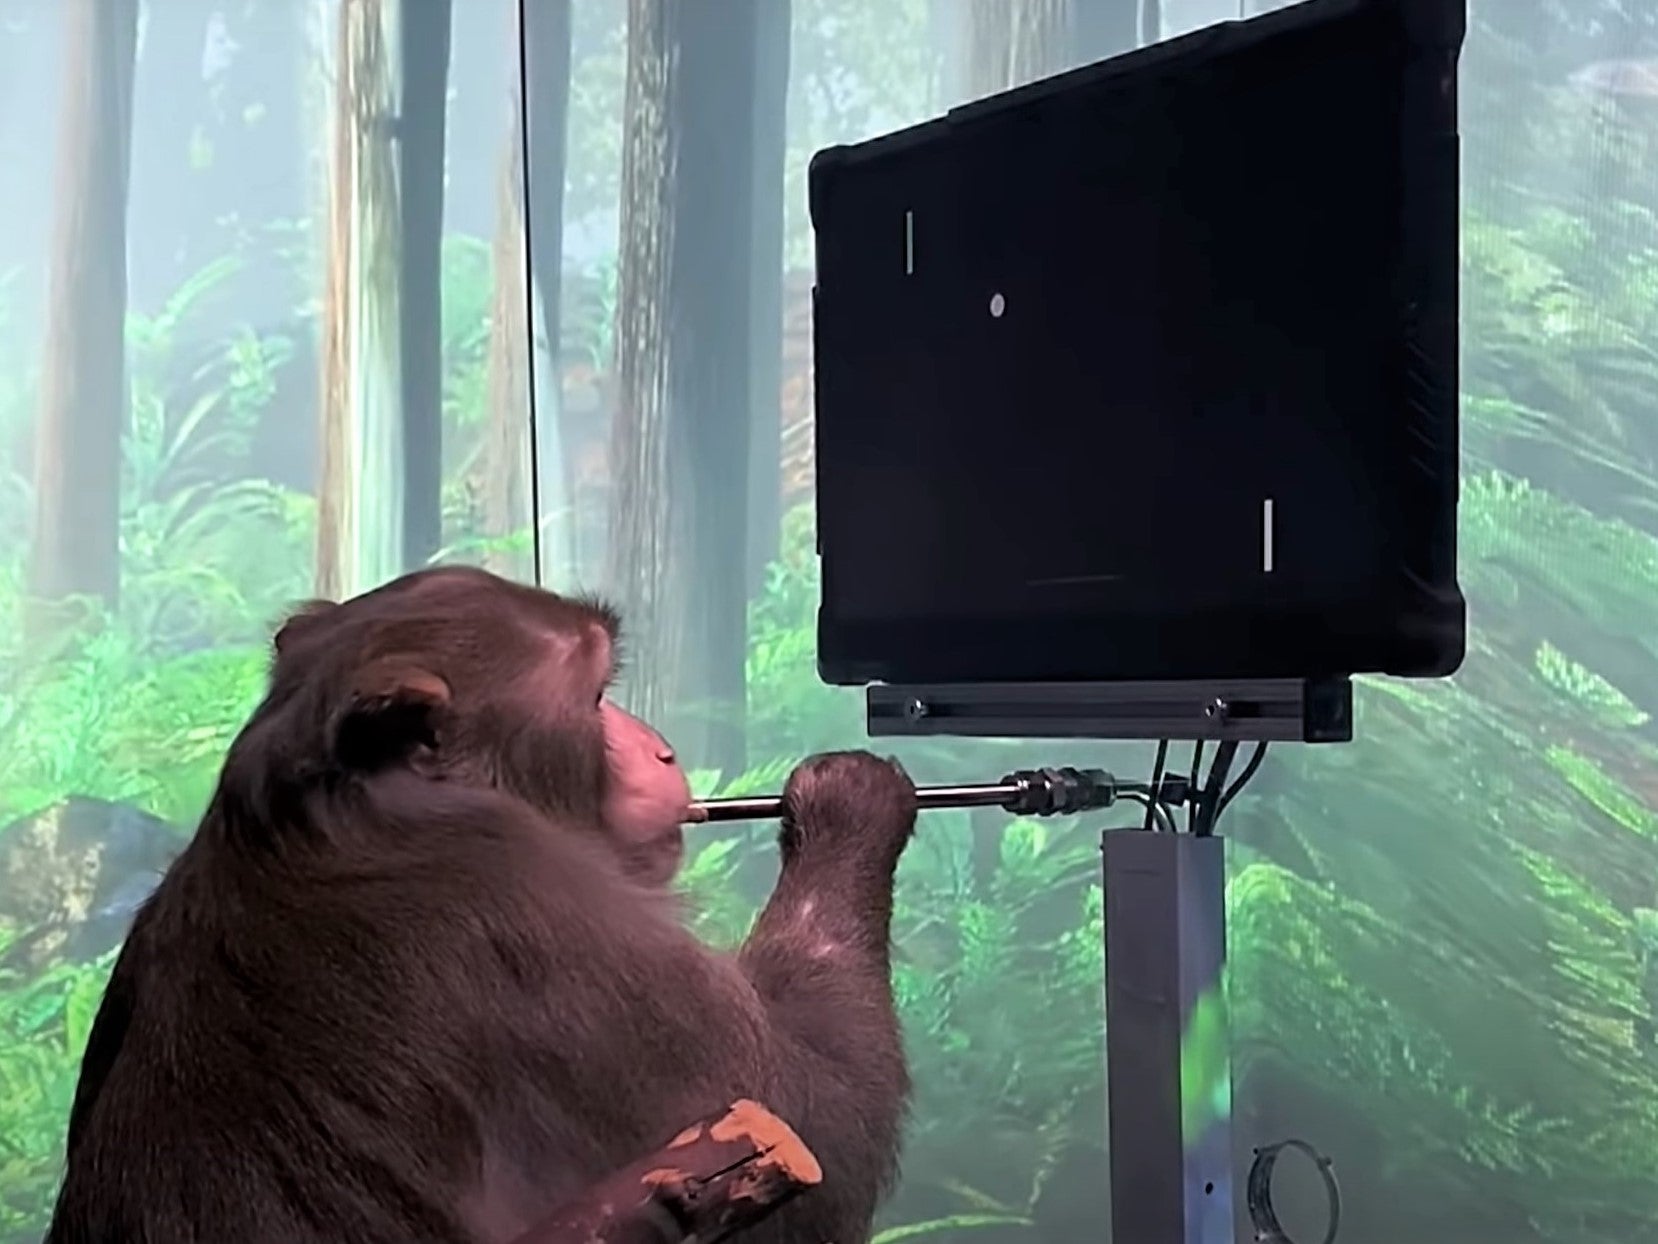 Neuralink’s monkey was able to move the virtual paddle of Pong just by thinking about it